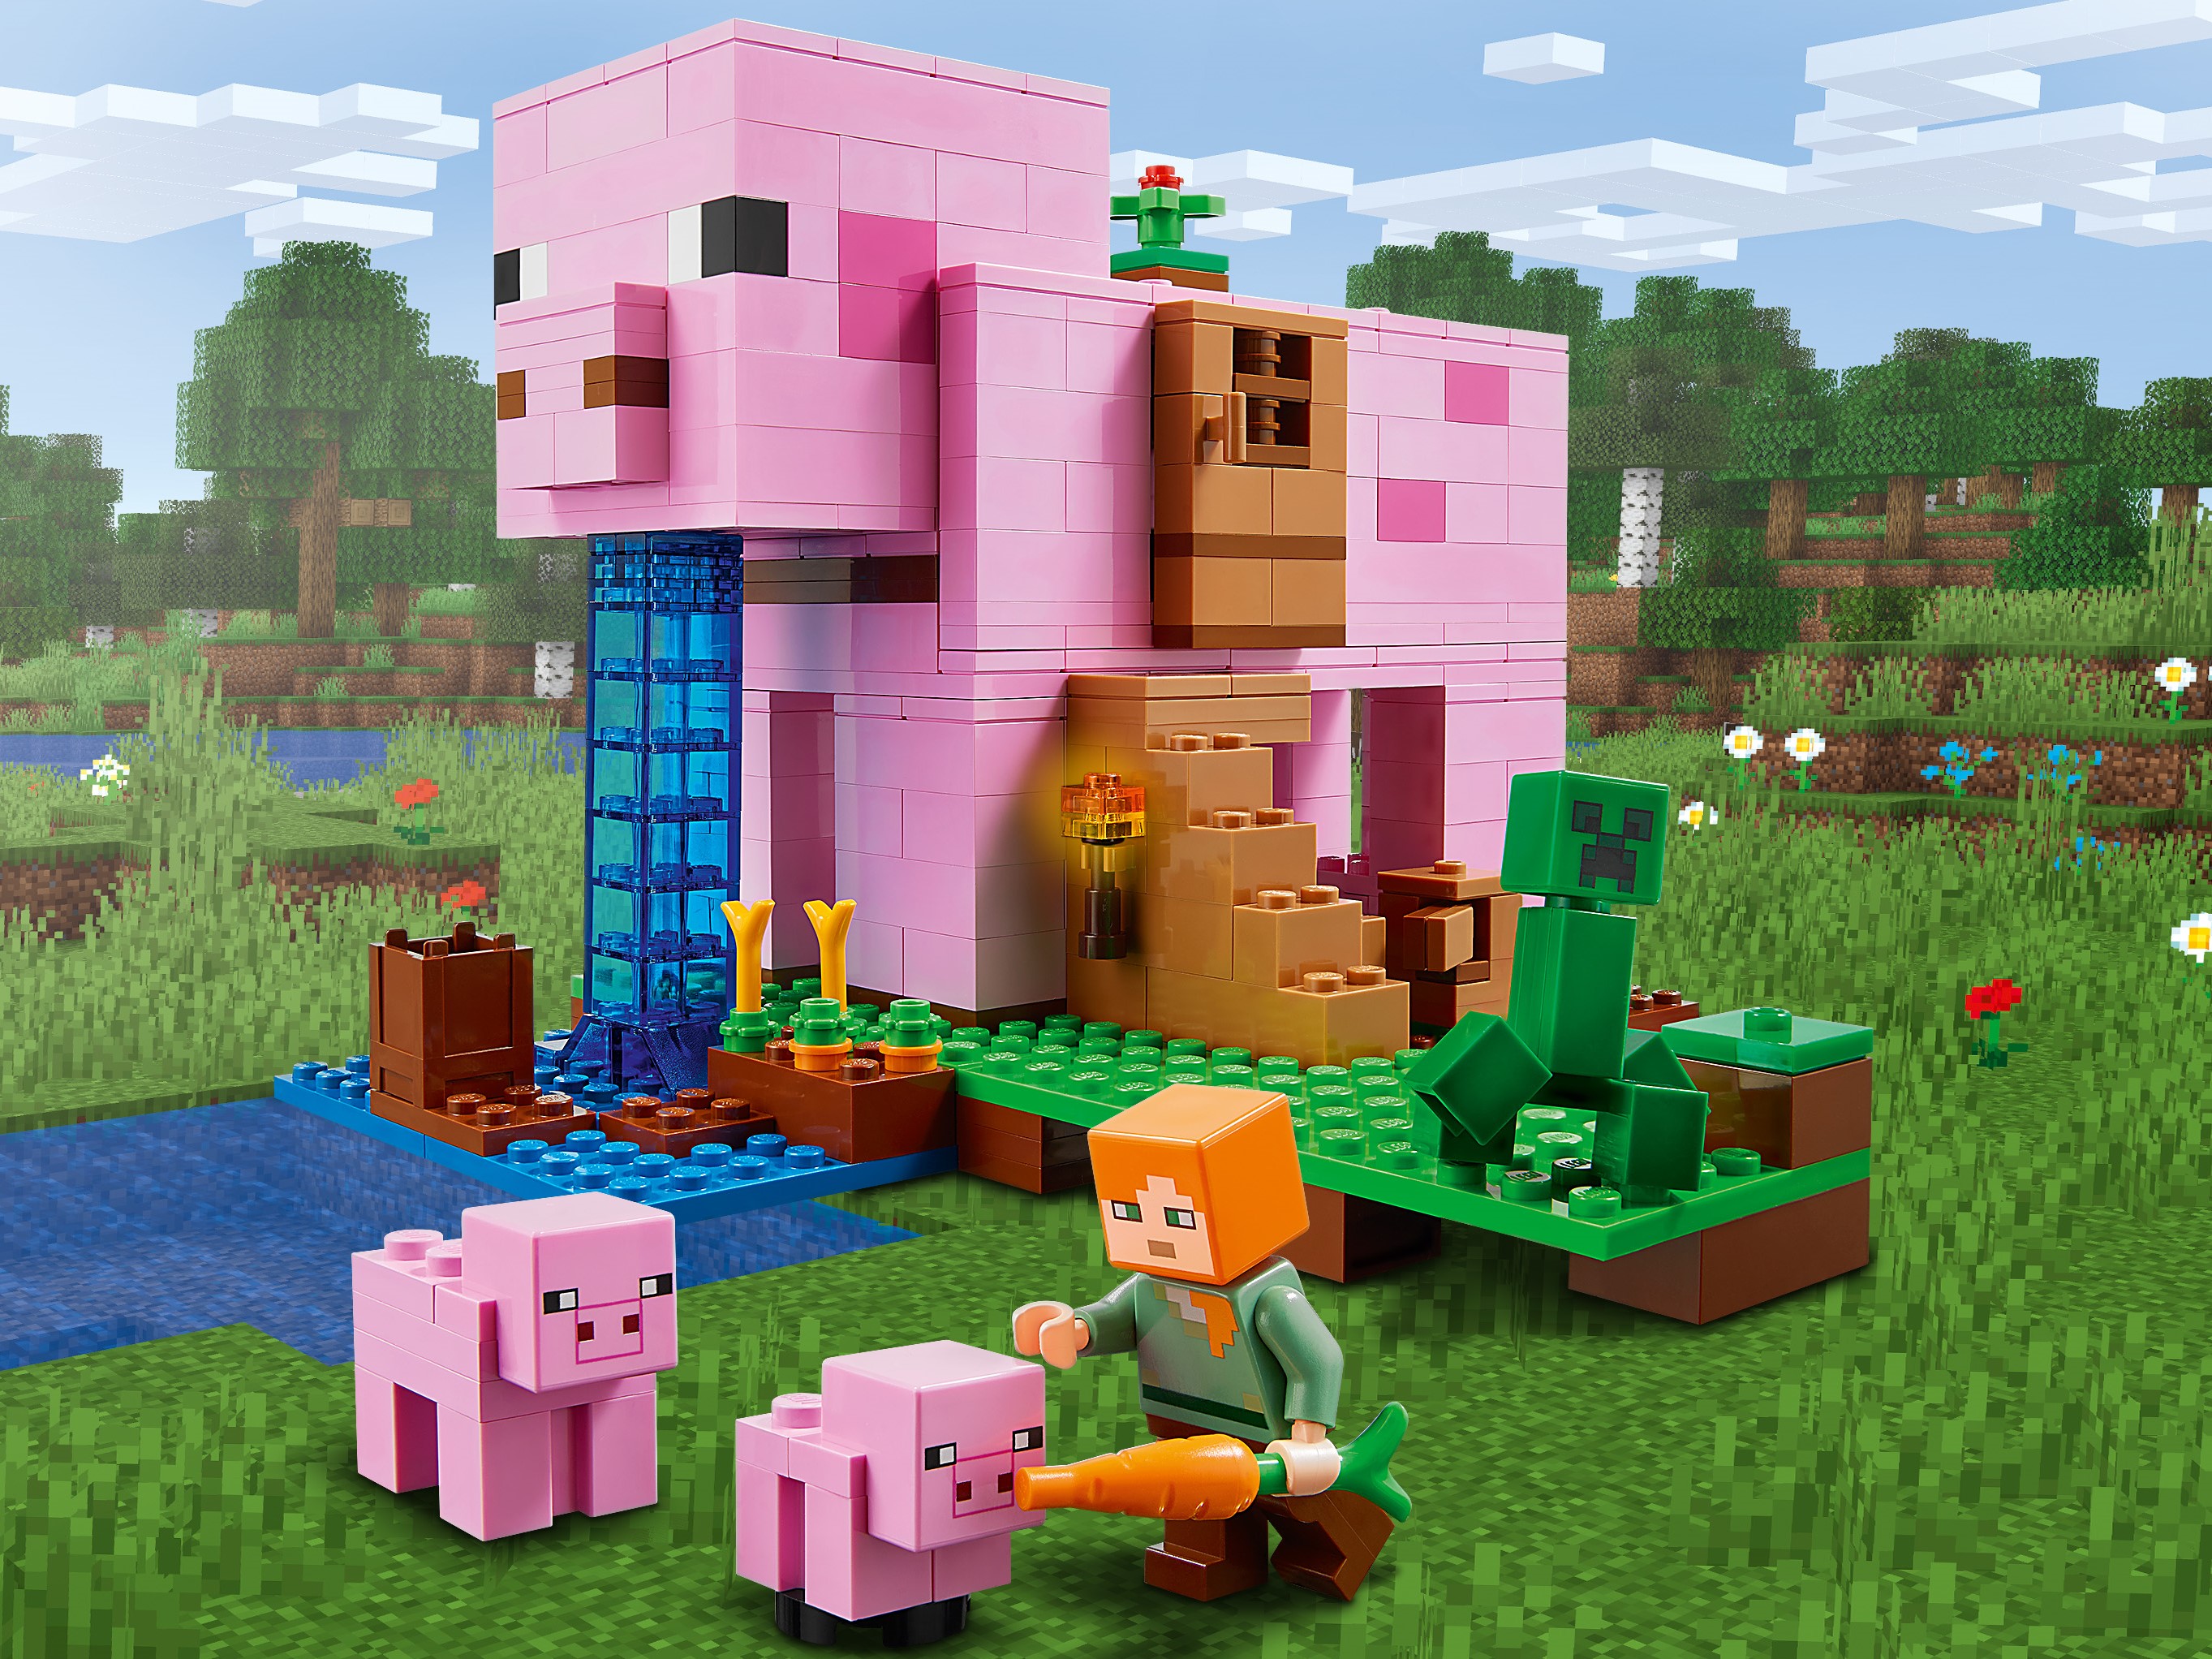 The Pig House 21170 | Buy Shop Official the Minecraft® US | online at LEGO®